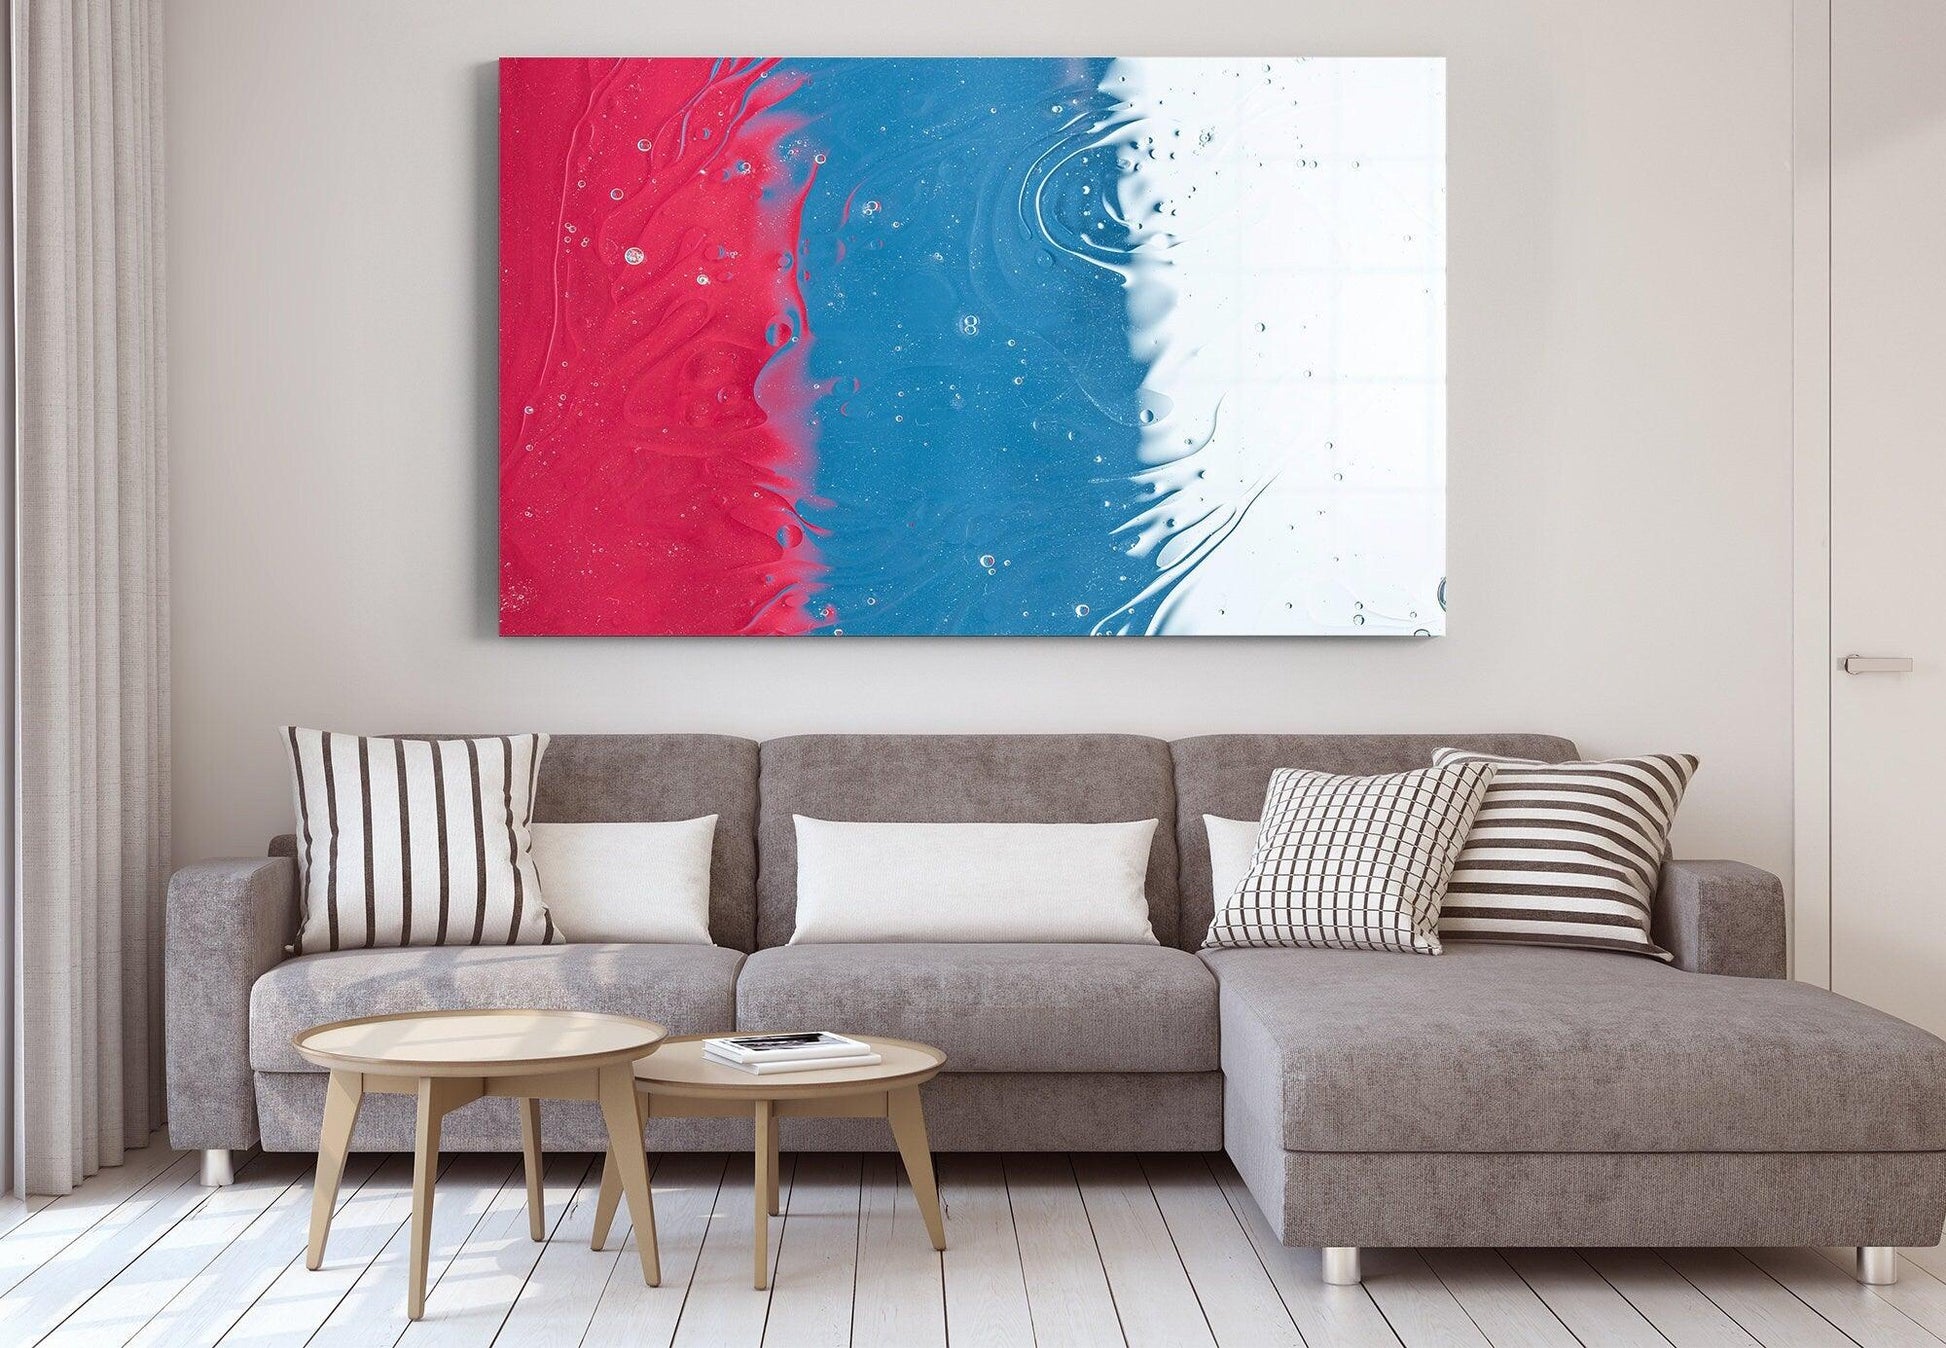 beautiful colorful abstract glass wall art| abstract design canvas wall art, abstract canvas art, blue and pink wall decor, glass gifts - TrendiArt